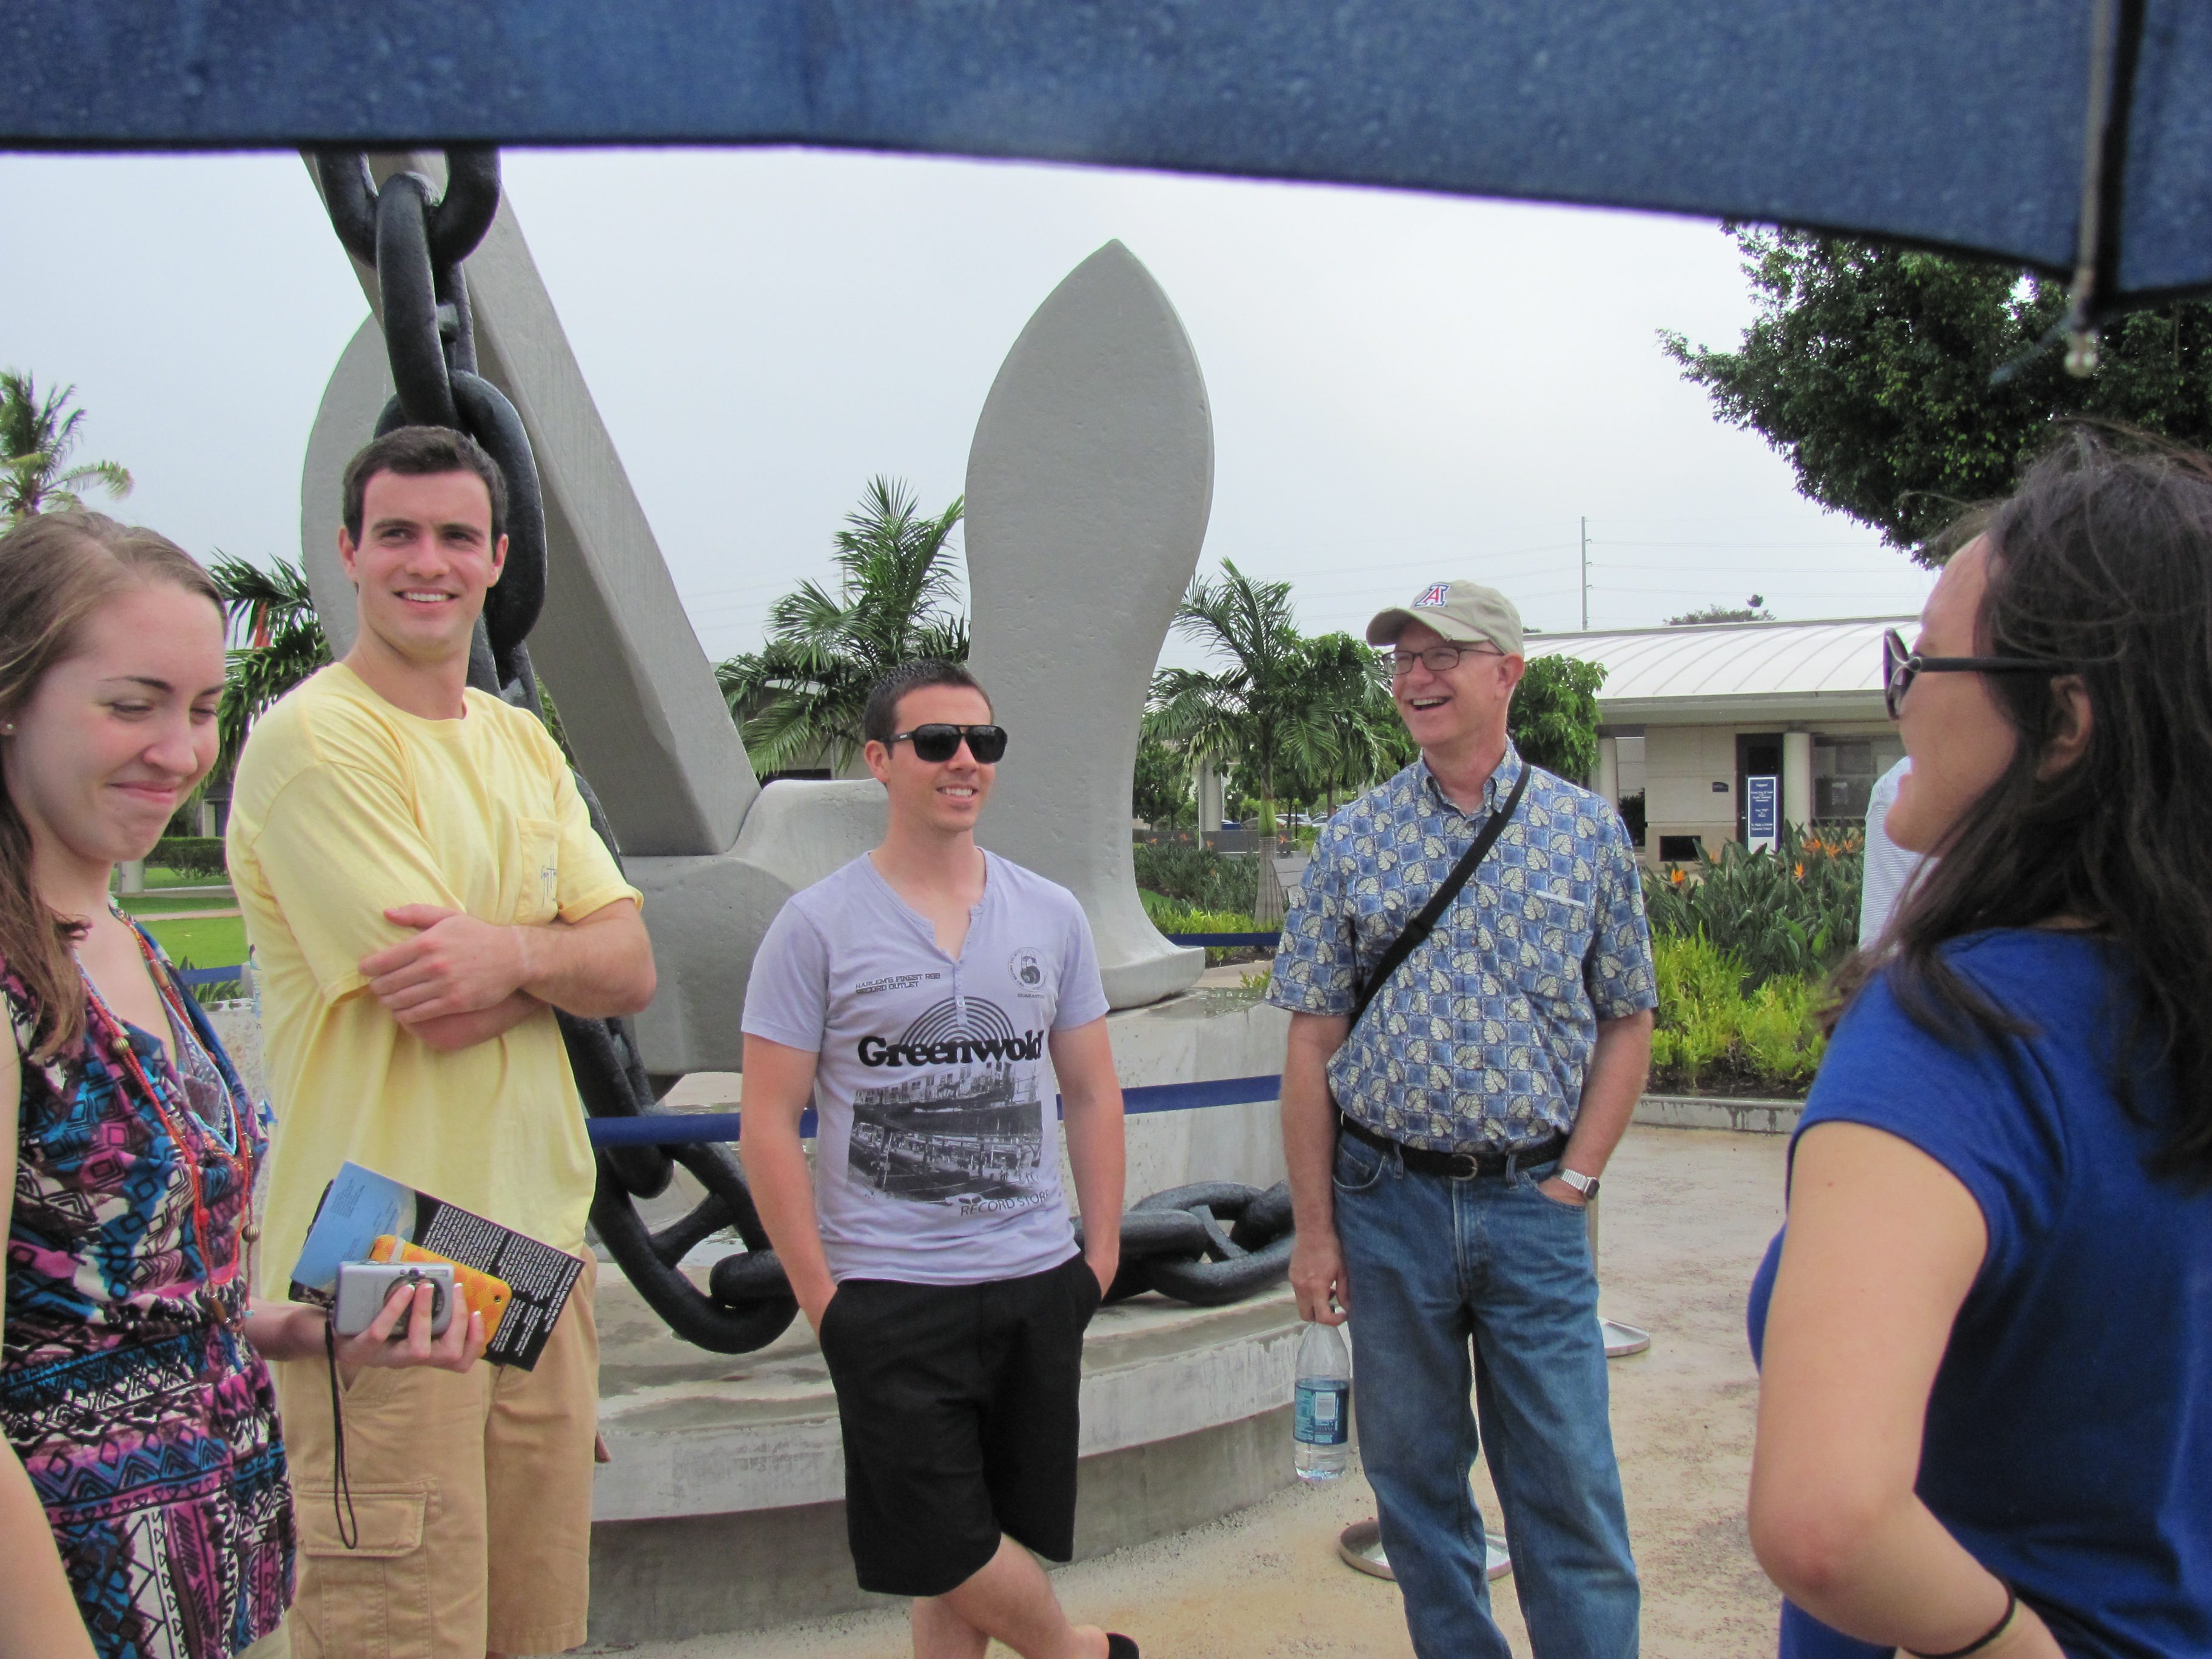 The group standing in front of the USS Arizona anchor